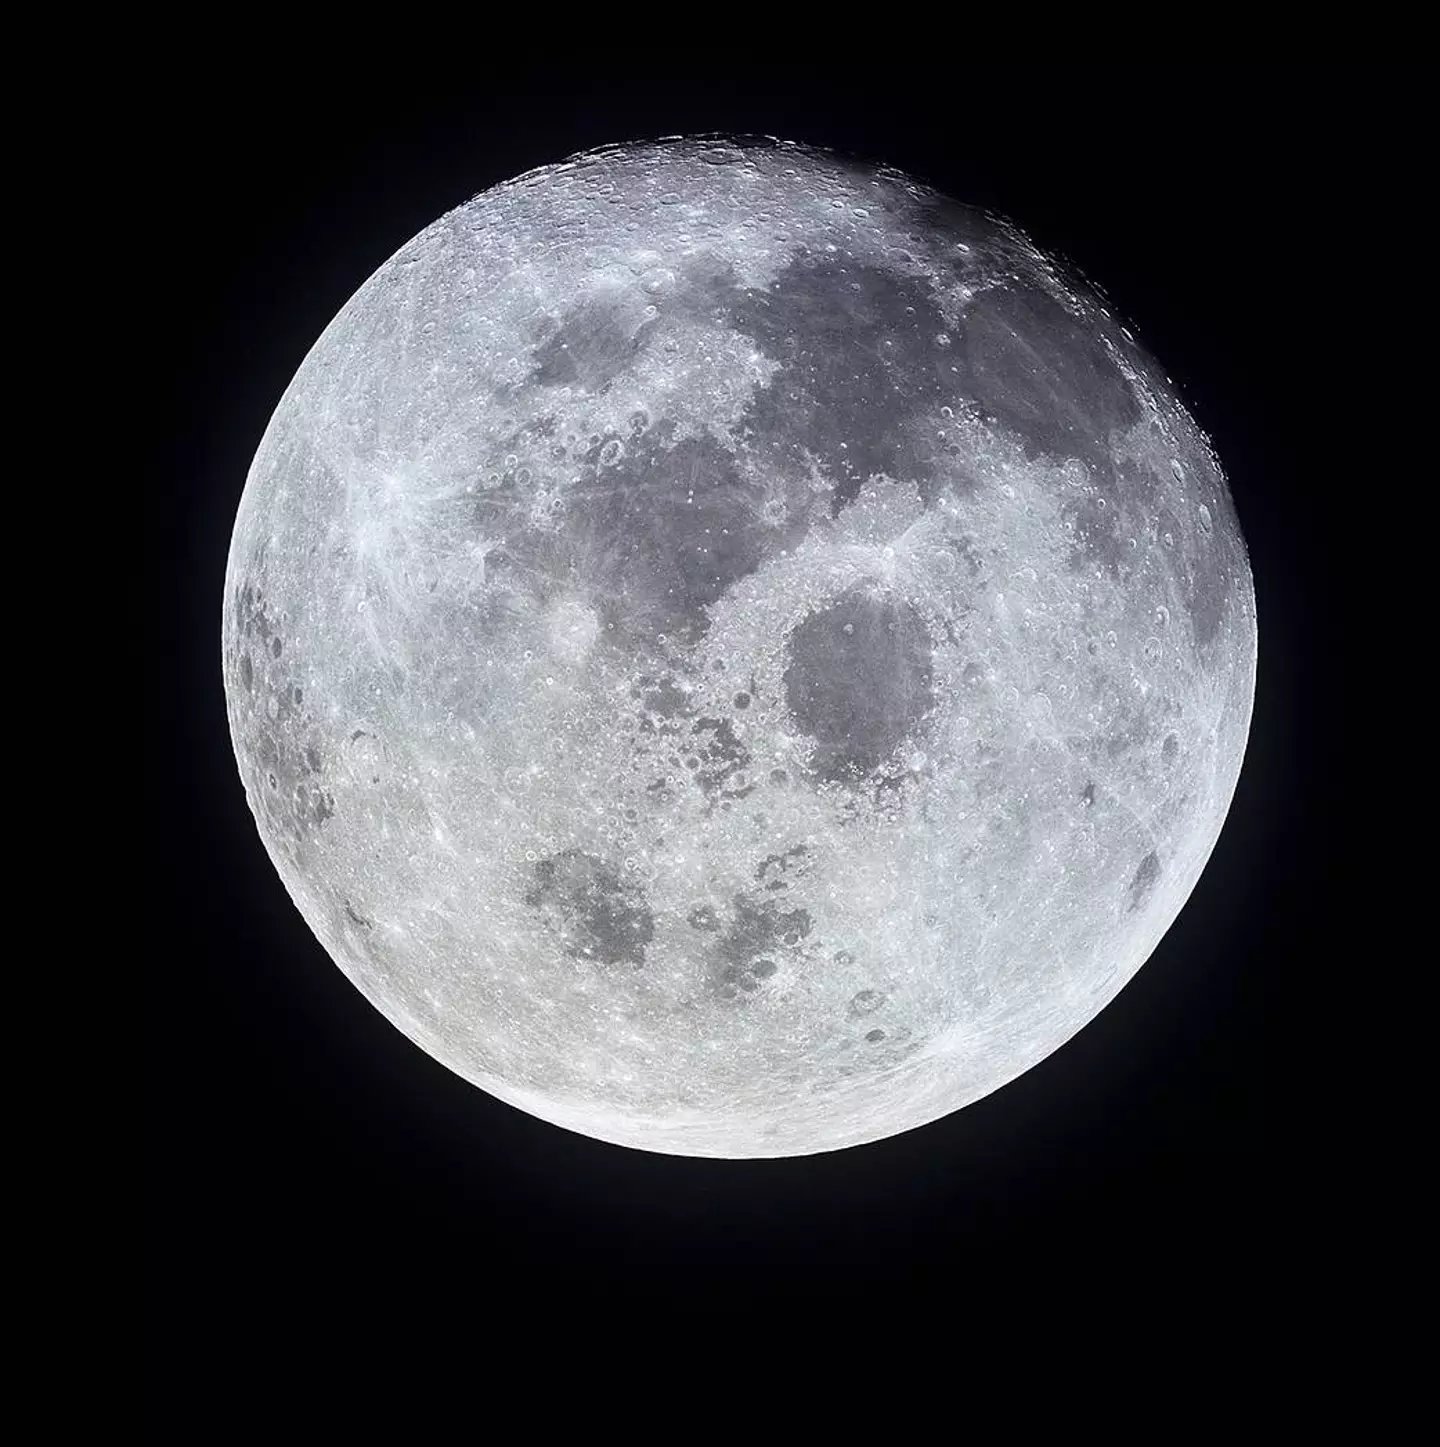 The moon is moving away from the Earth and making days longer.